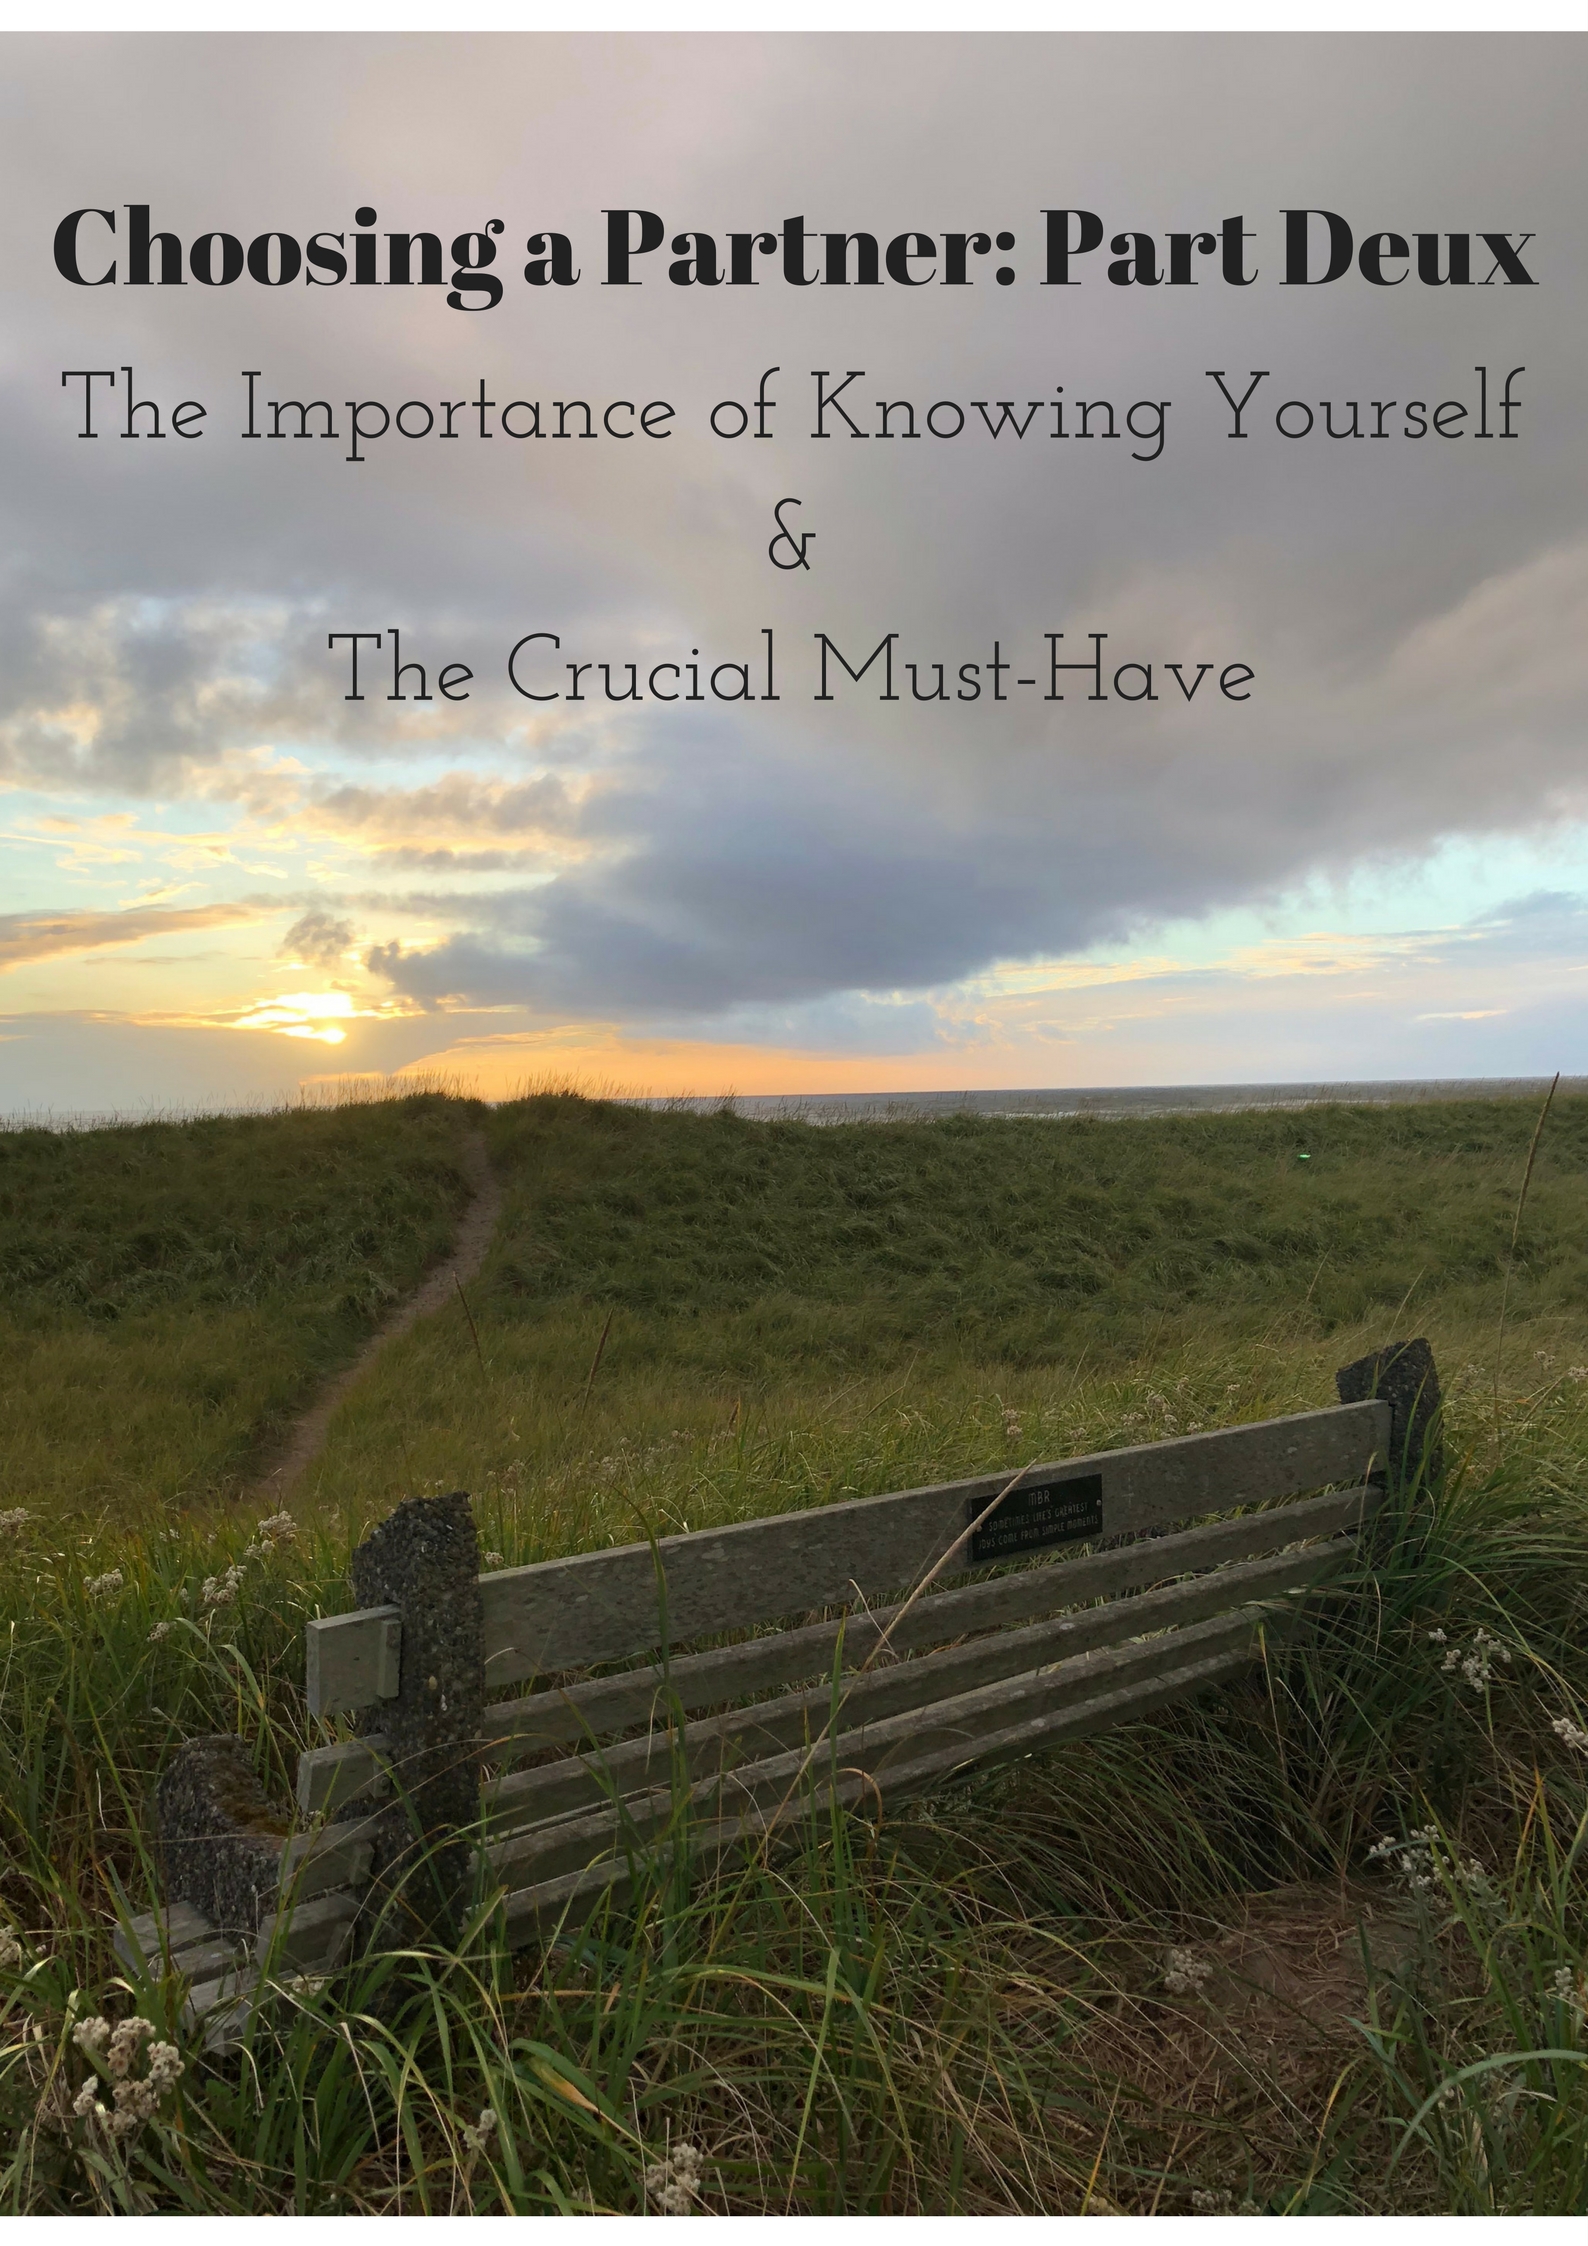 179: Choosing a Partner — Part Deux: The Importance of Knowing Yourself & The Crucial Must-Have